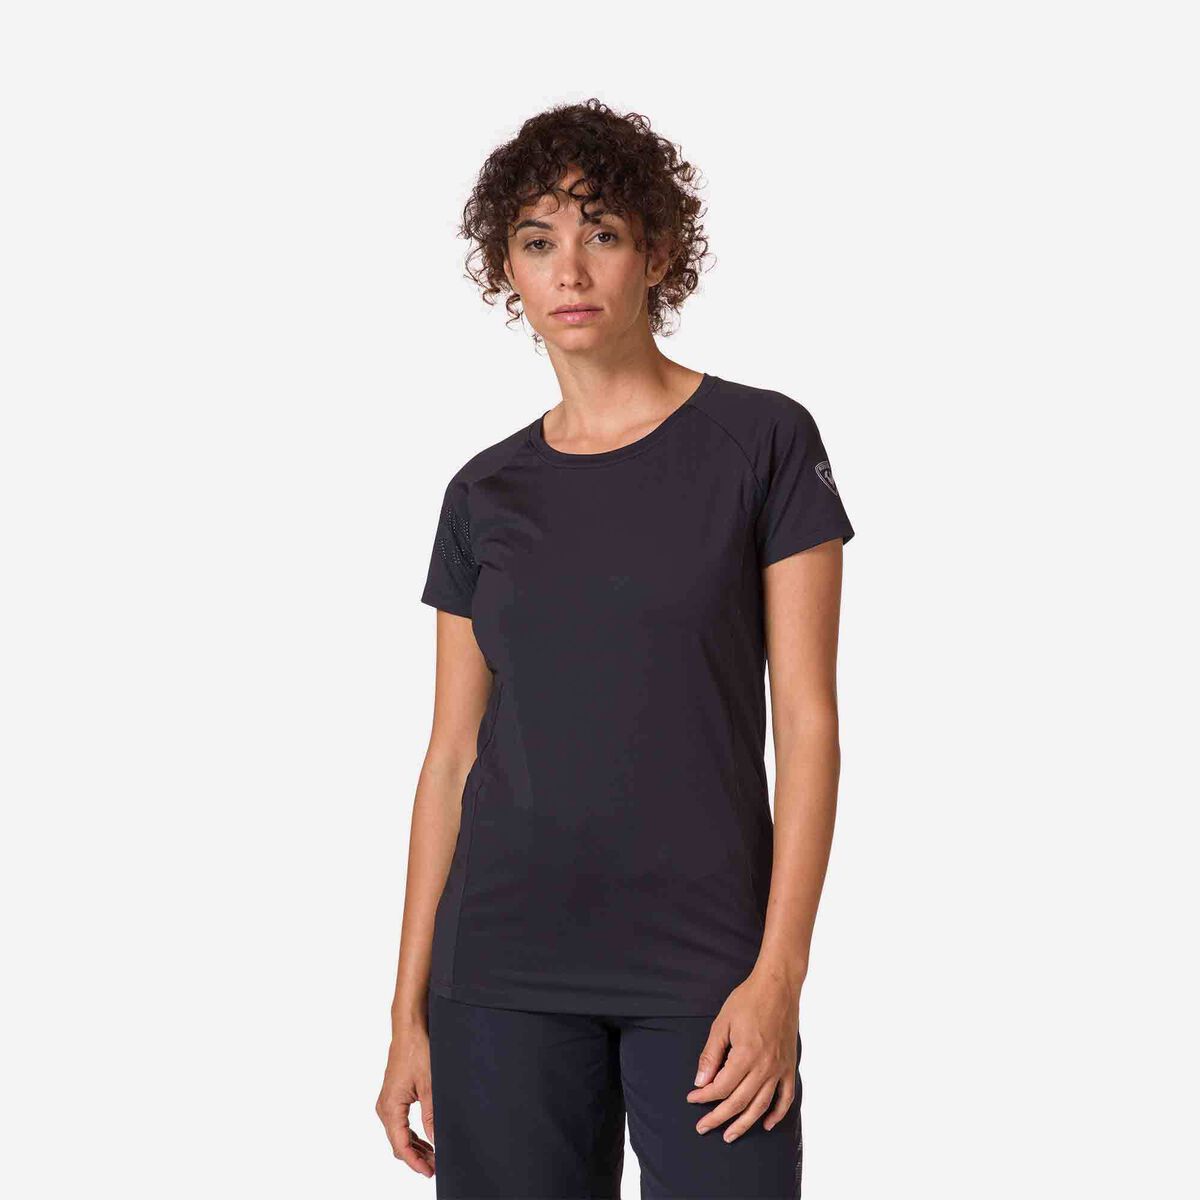 Women's short sleeve jersey relaxed fit